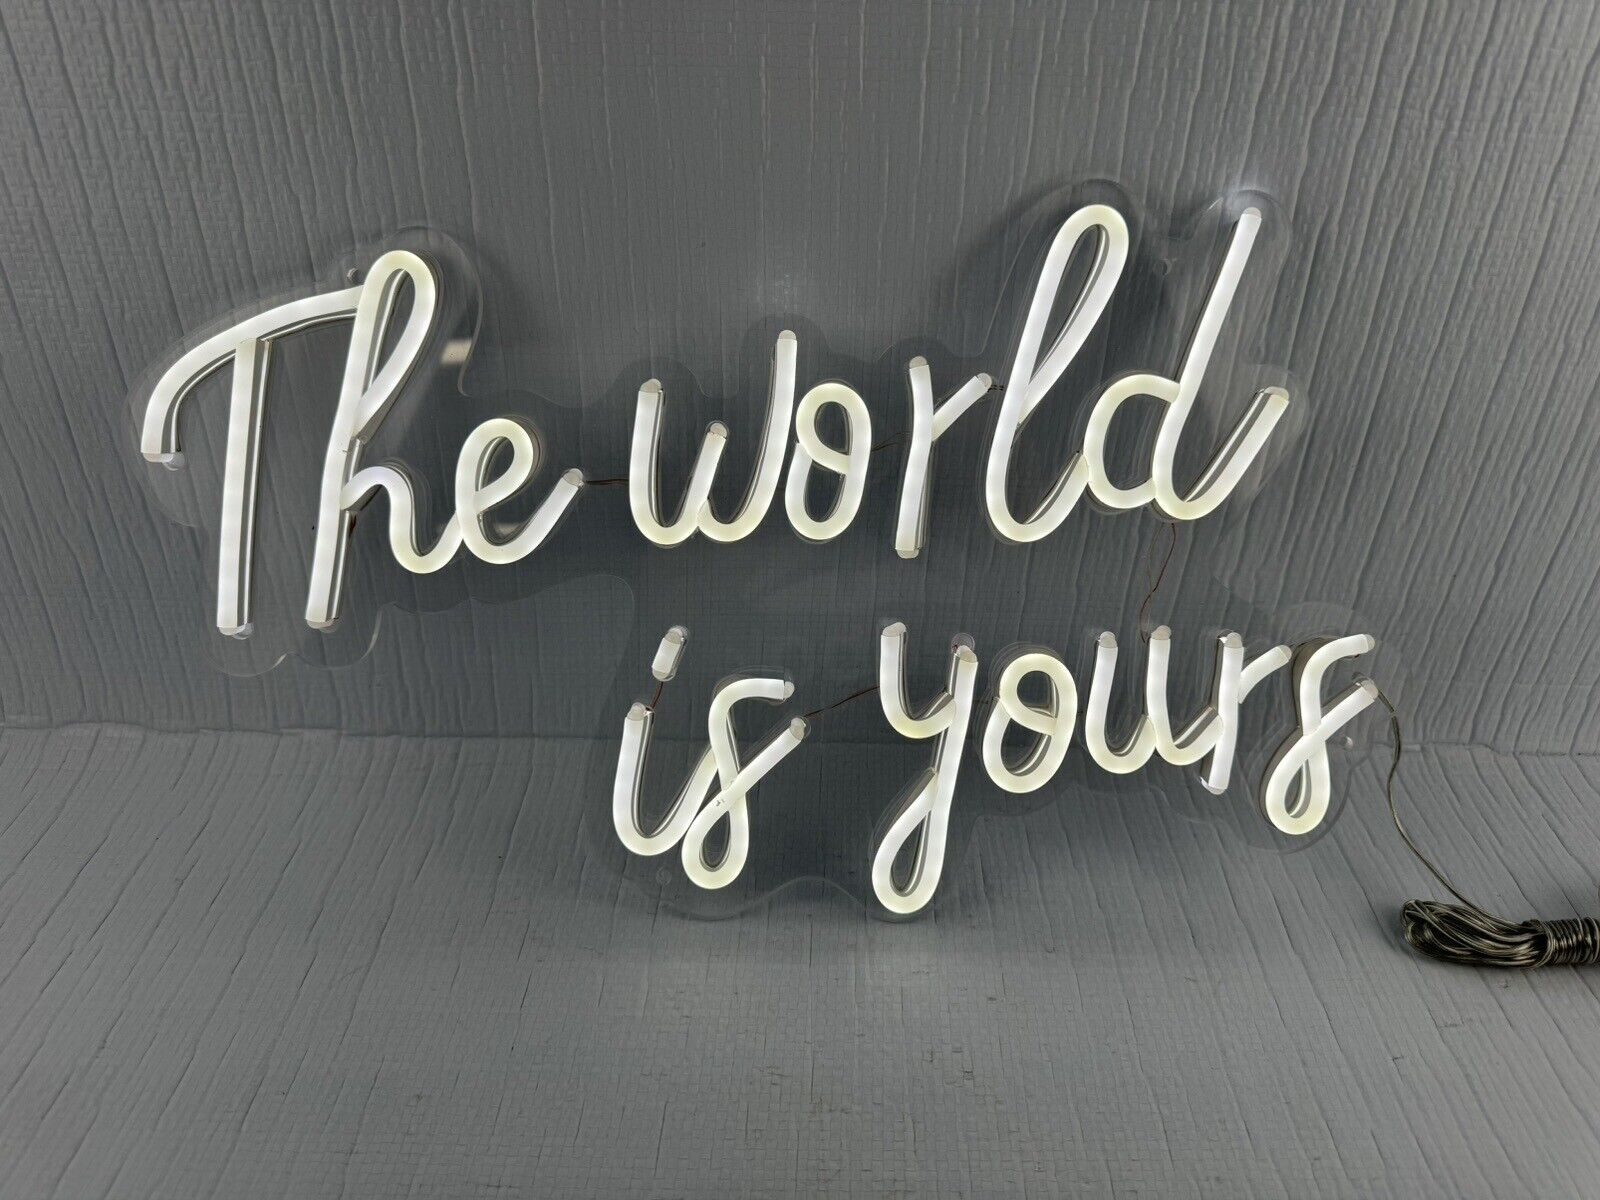 THE WORLD IS YOURS Neon Sign Handcraft Wall Decor Beer Sign Man Cave White